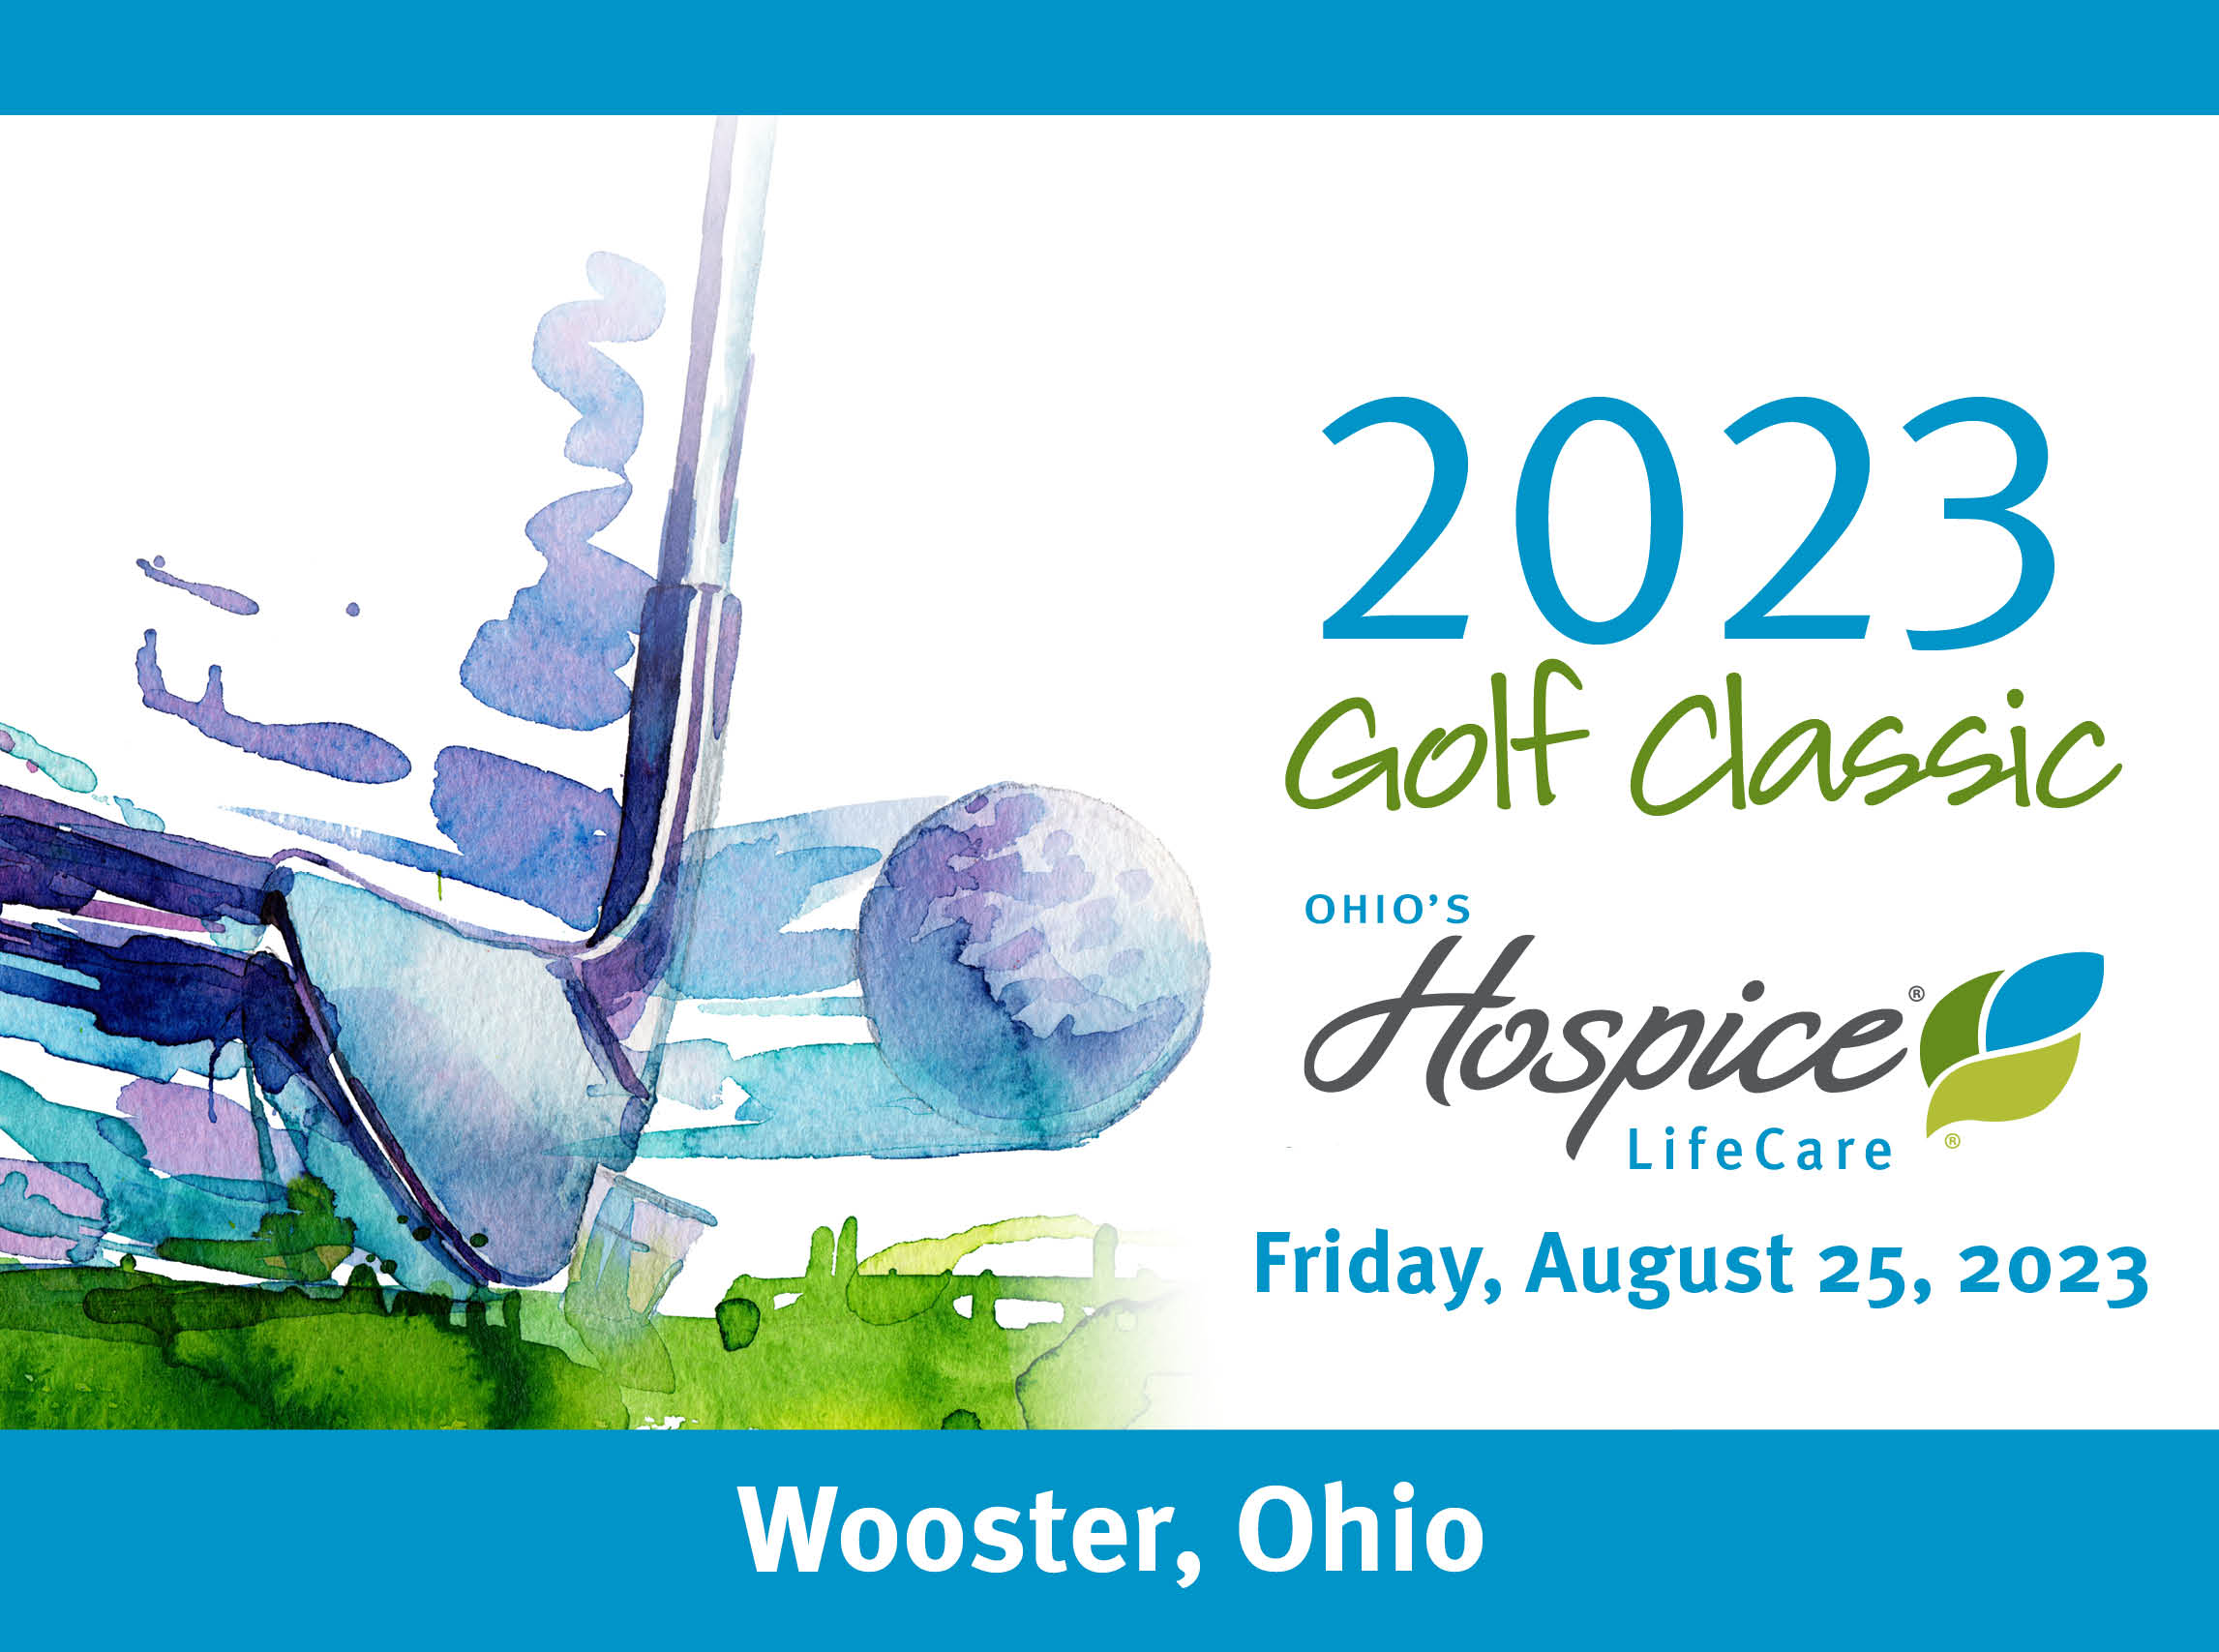 2023 Golf Classic Ohio's Hospice LifeCare Friday, August 25, 2023 Wooster, Ohio